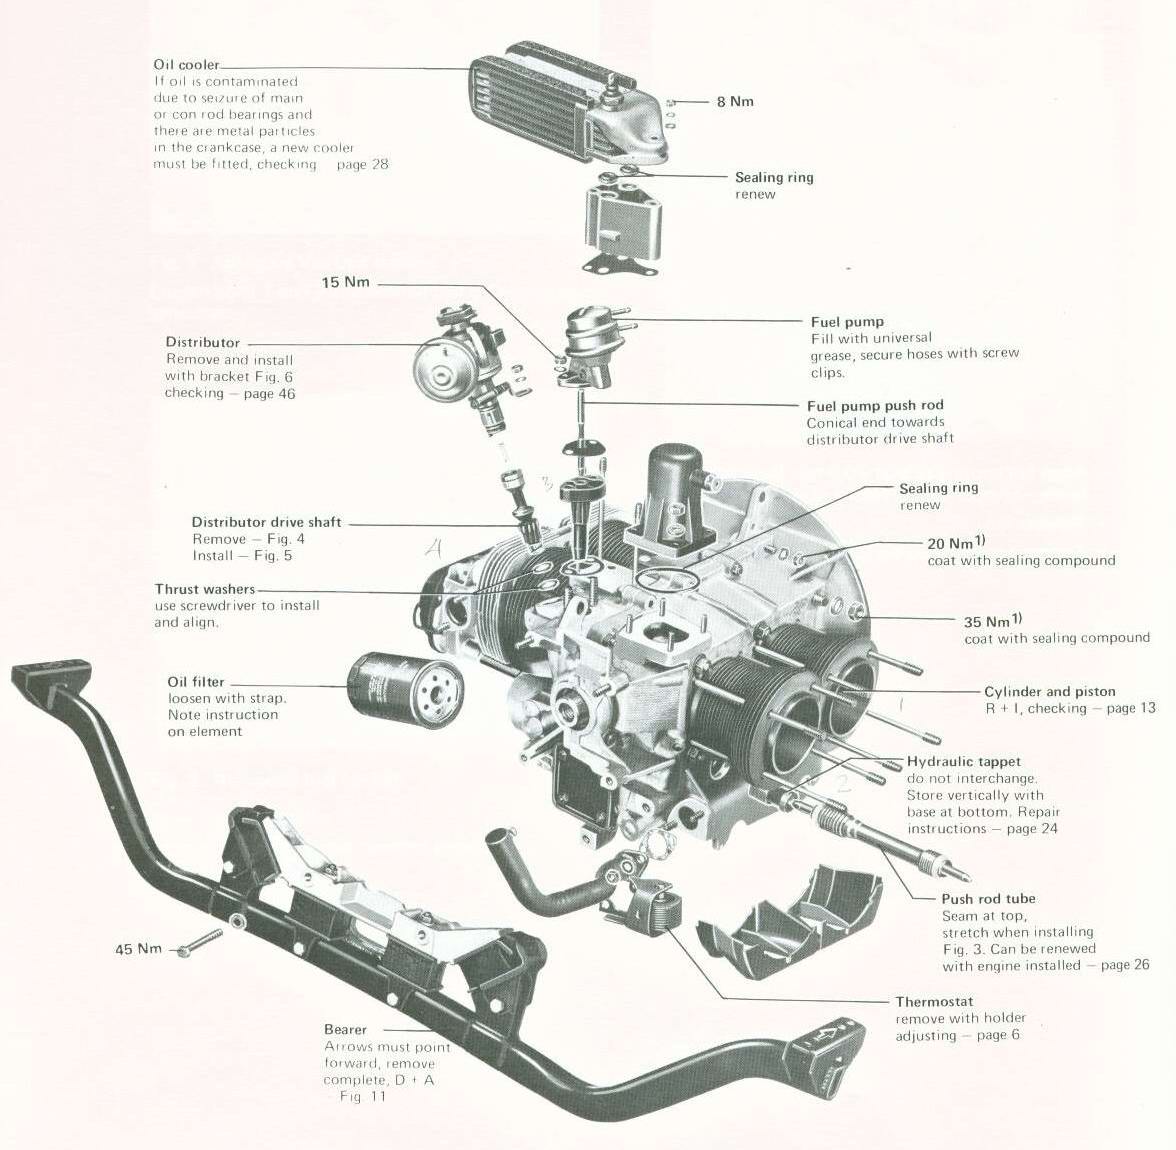 Aircooled CT Schematic 01.jpg